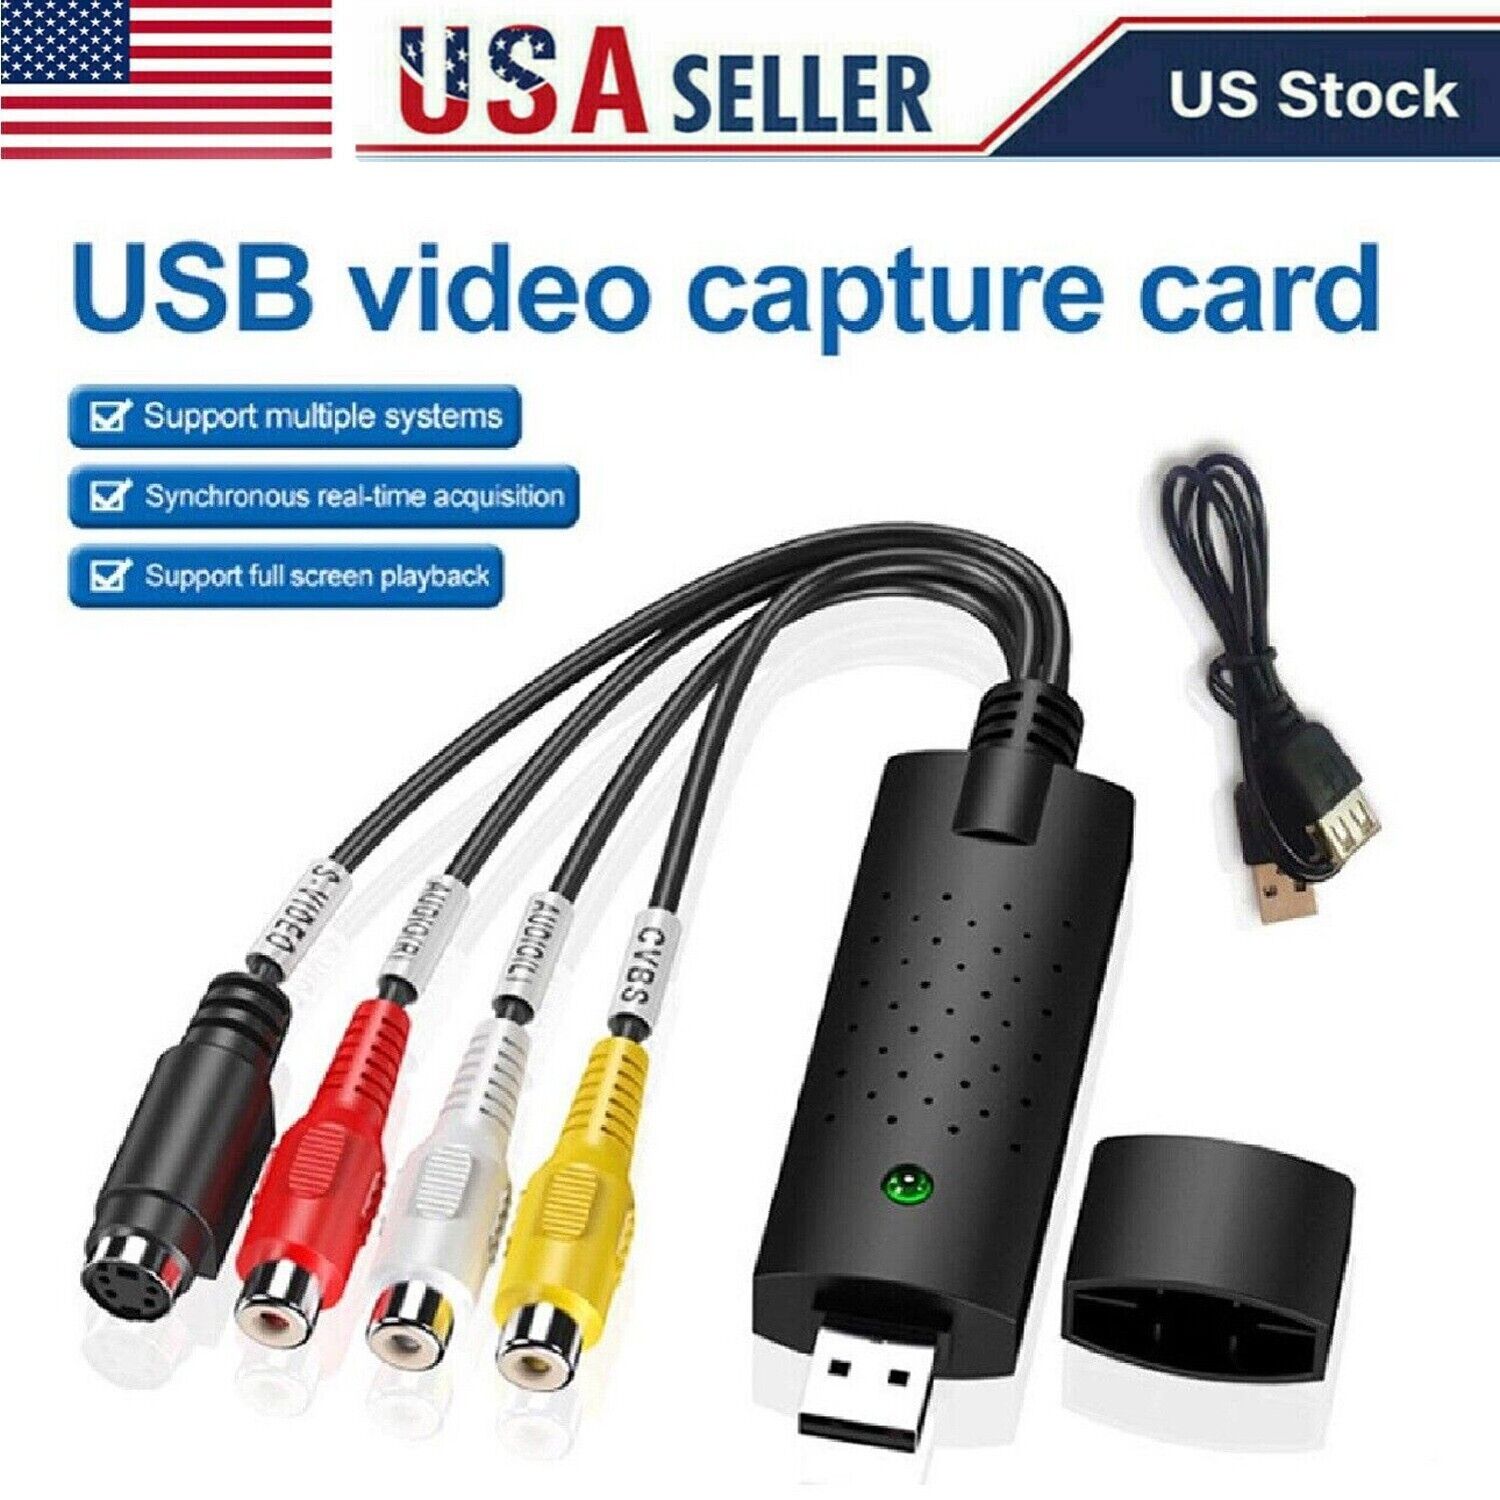 USB 2.0 Audio TV Video VHS to DVD VCR PC DVR HDD Converter Adapter Capture Card